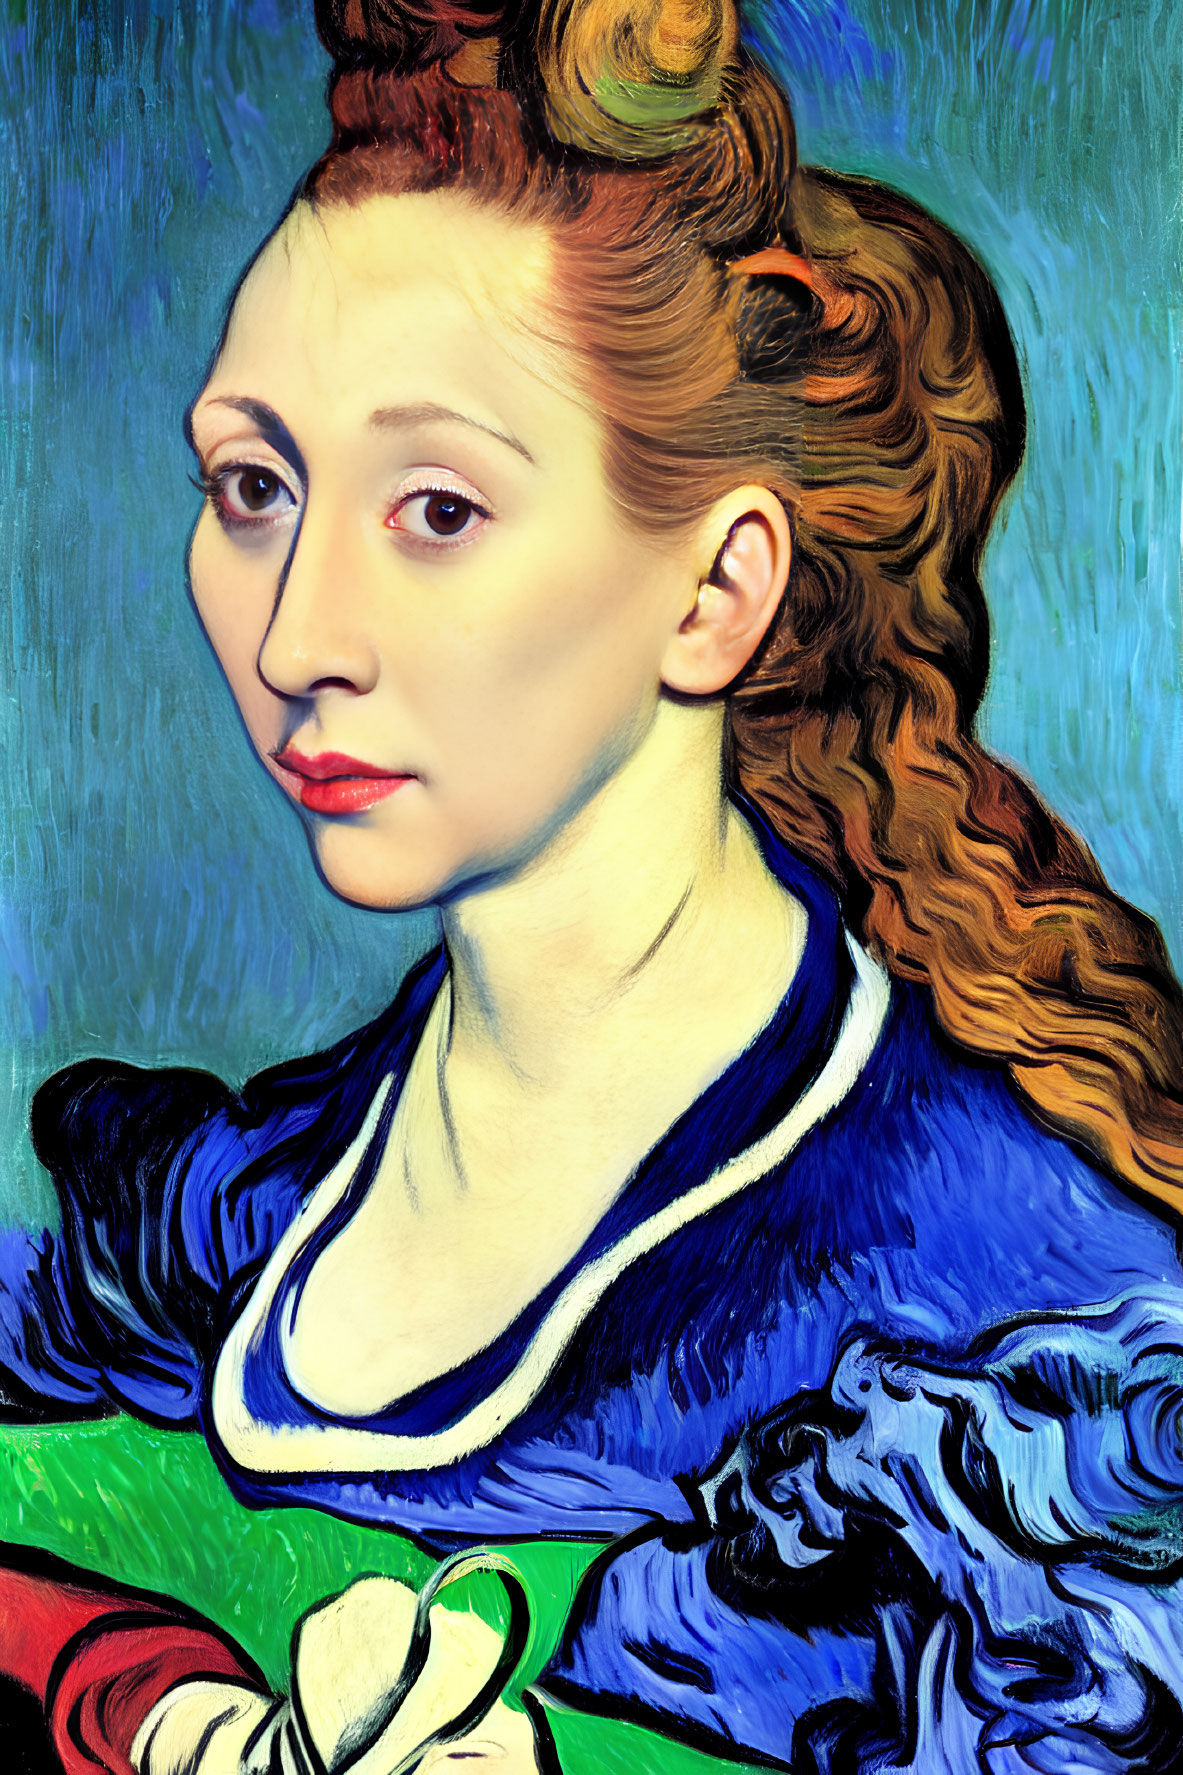 Portrait blending real woman's face with Van Gogh's post-impressionist style